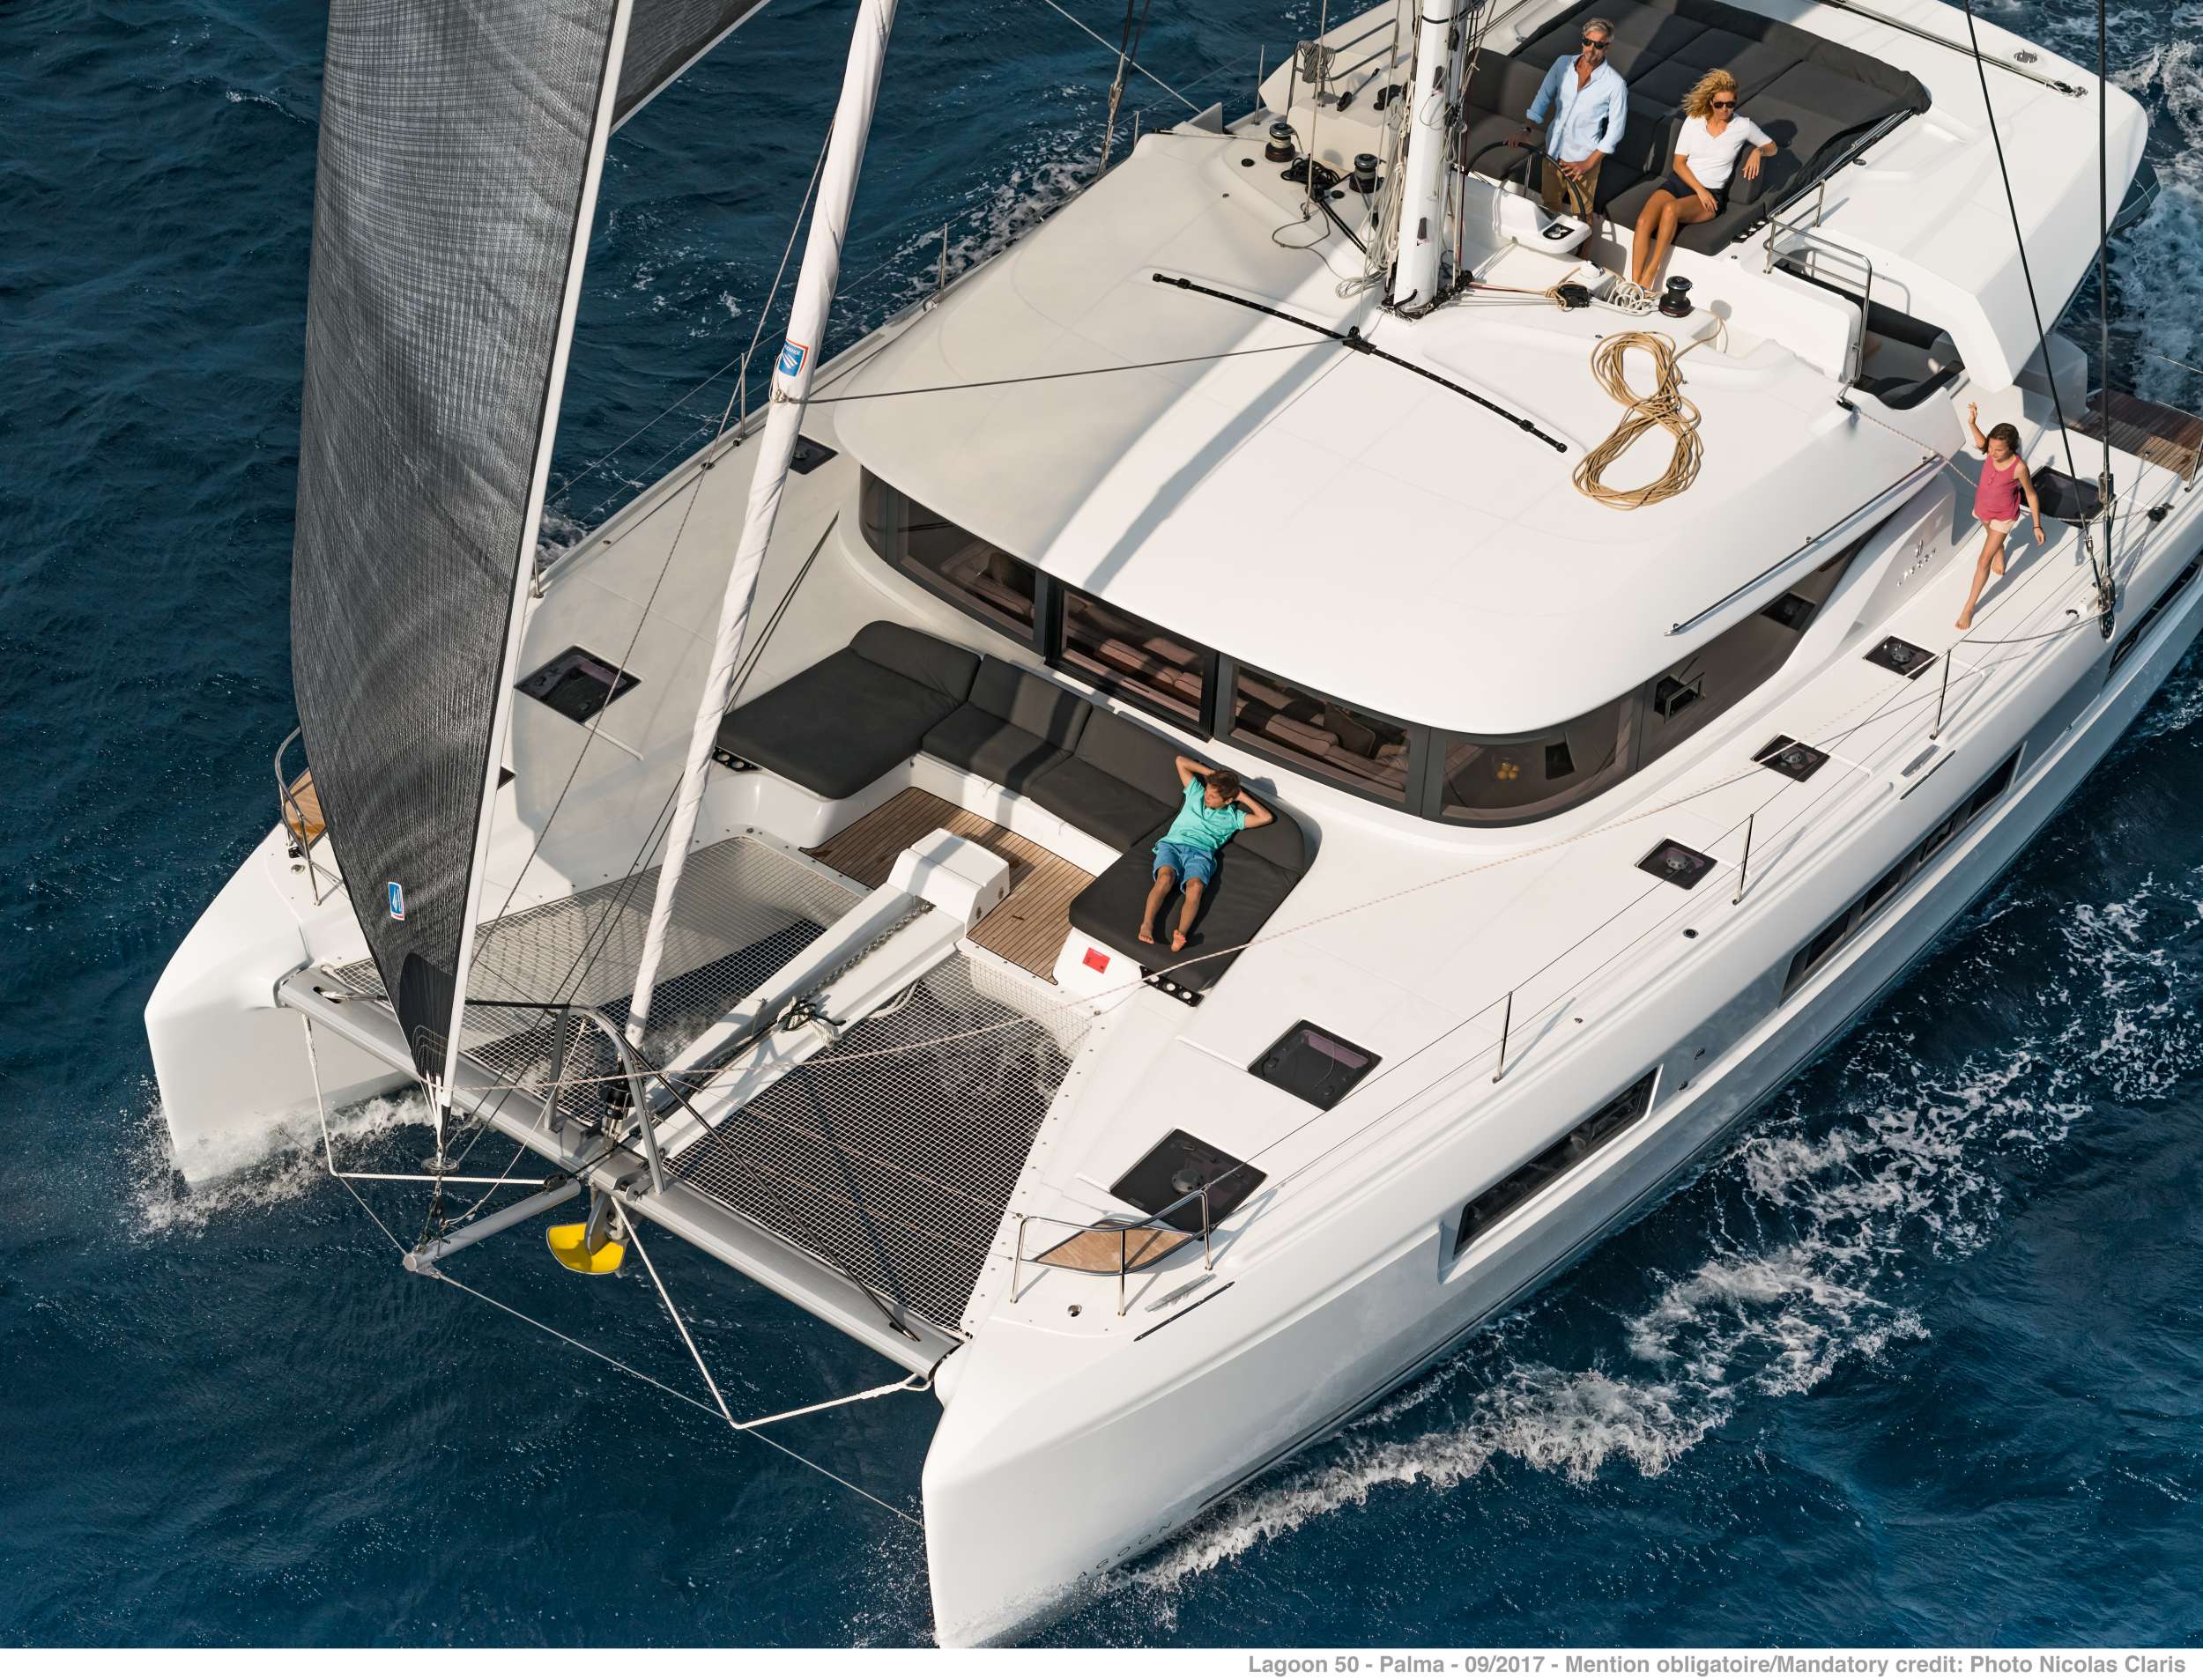 ONEIDA 2 - Yacht Charter Syros & Boat hire in Greece 6